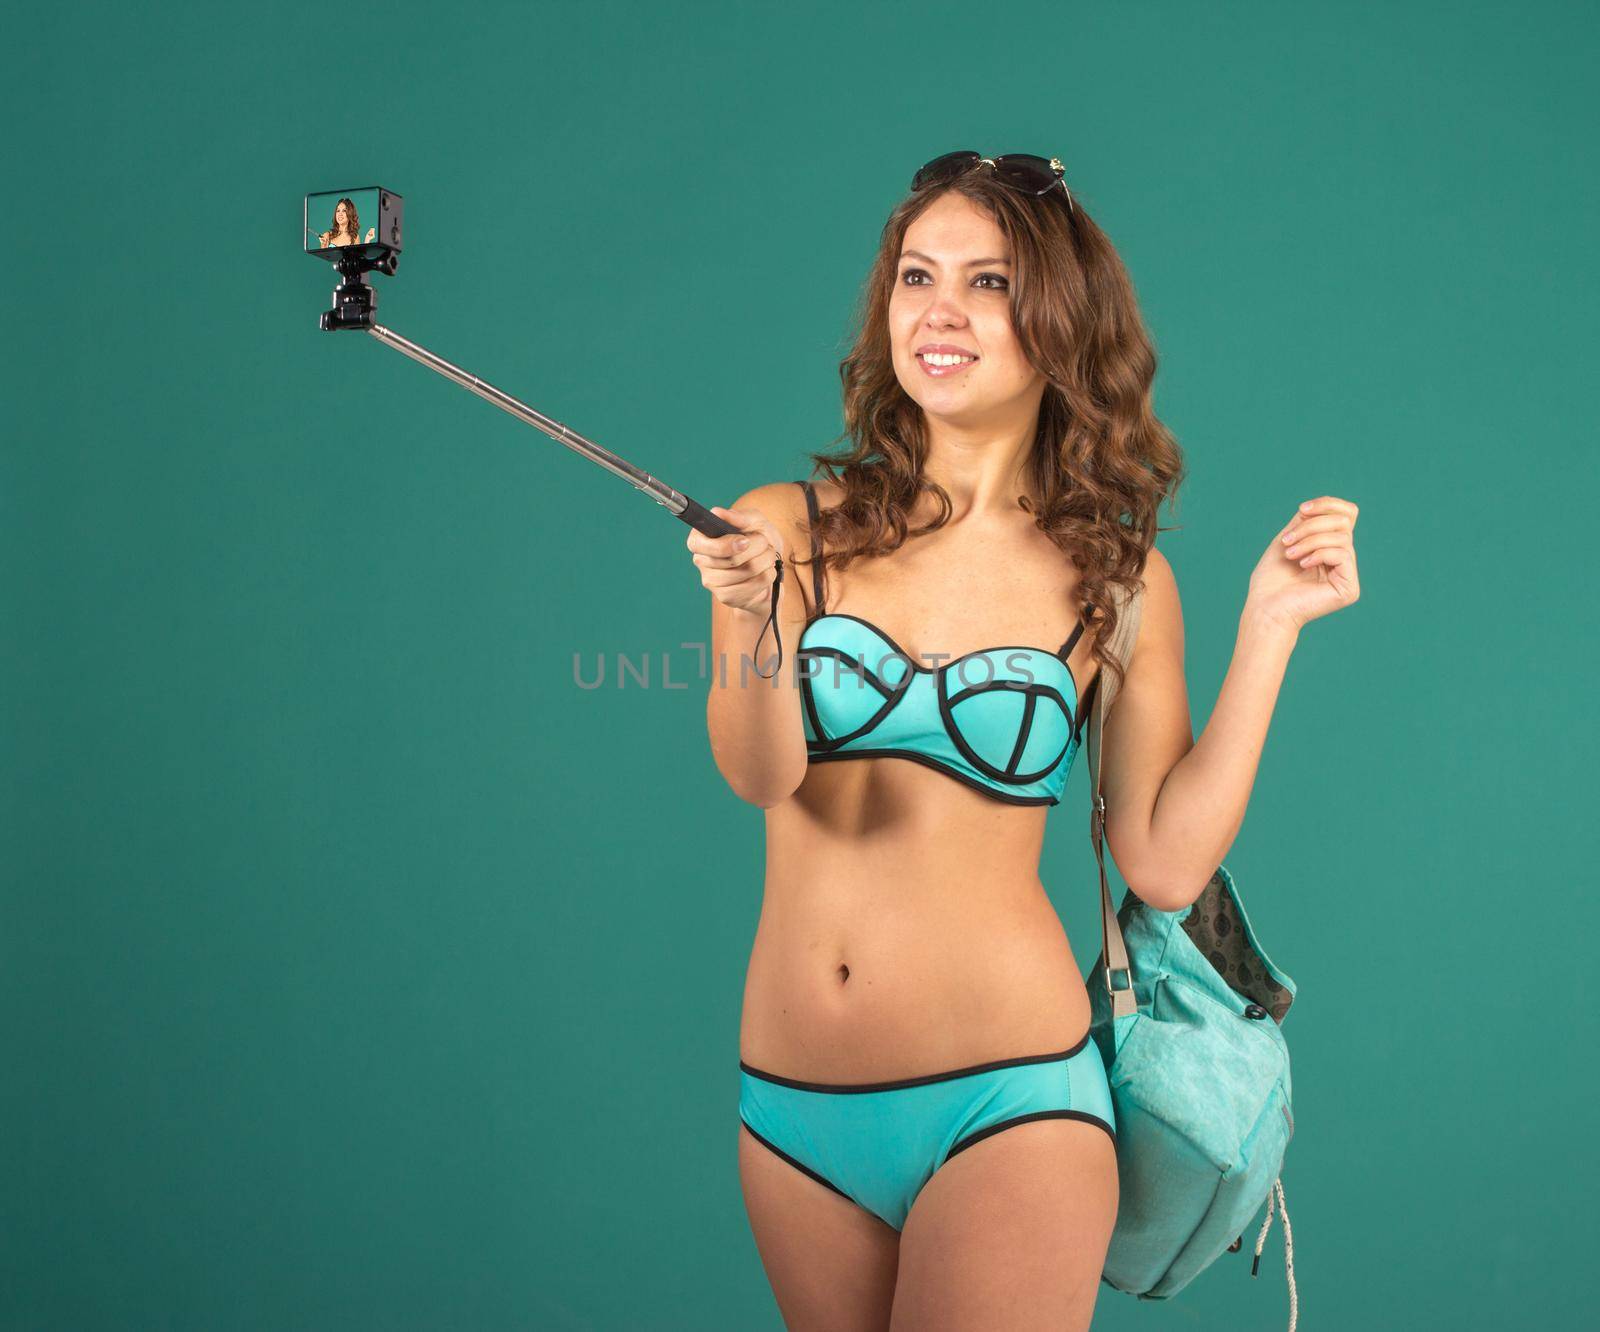 Hipster girl making selfie with action camera on green background wearing swimwear.